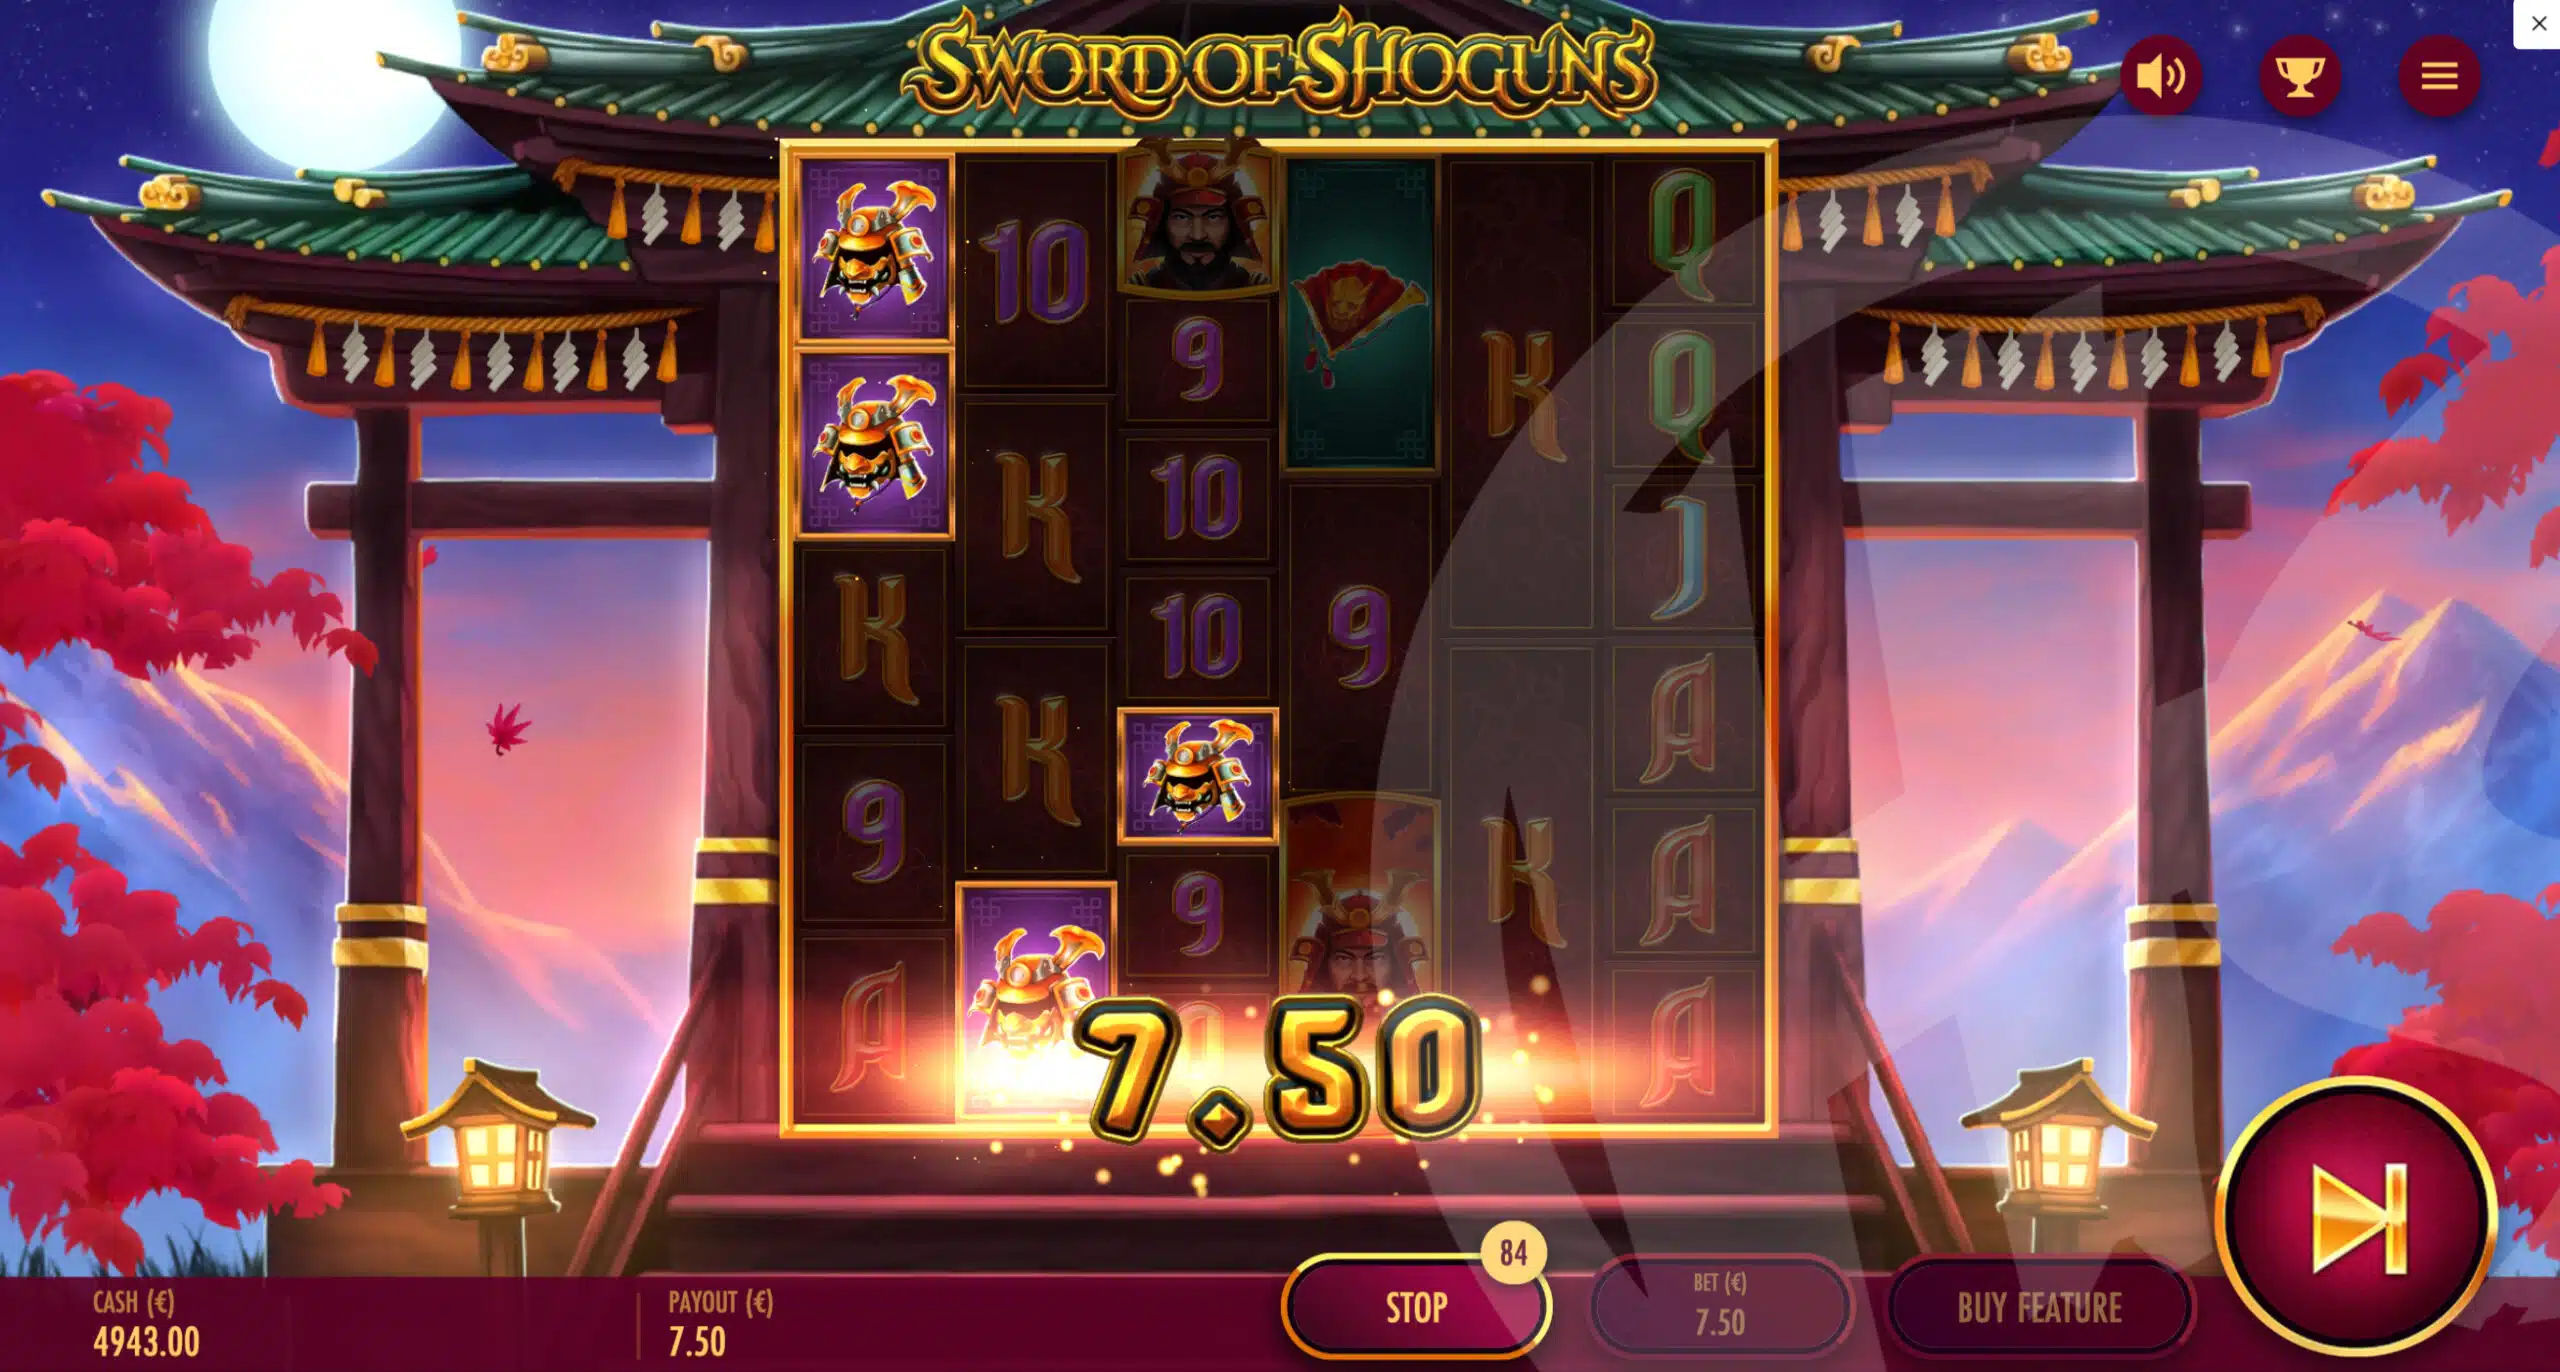 Sword of Shoguns Offers Players 5,040 Ways to Win